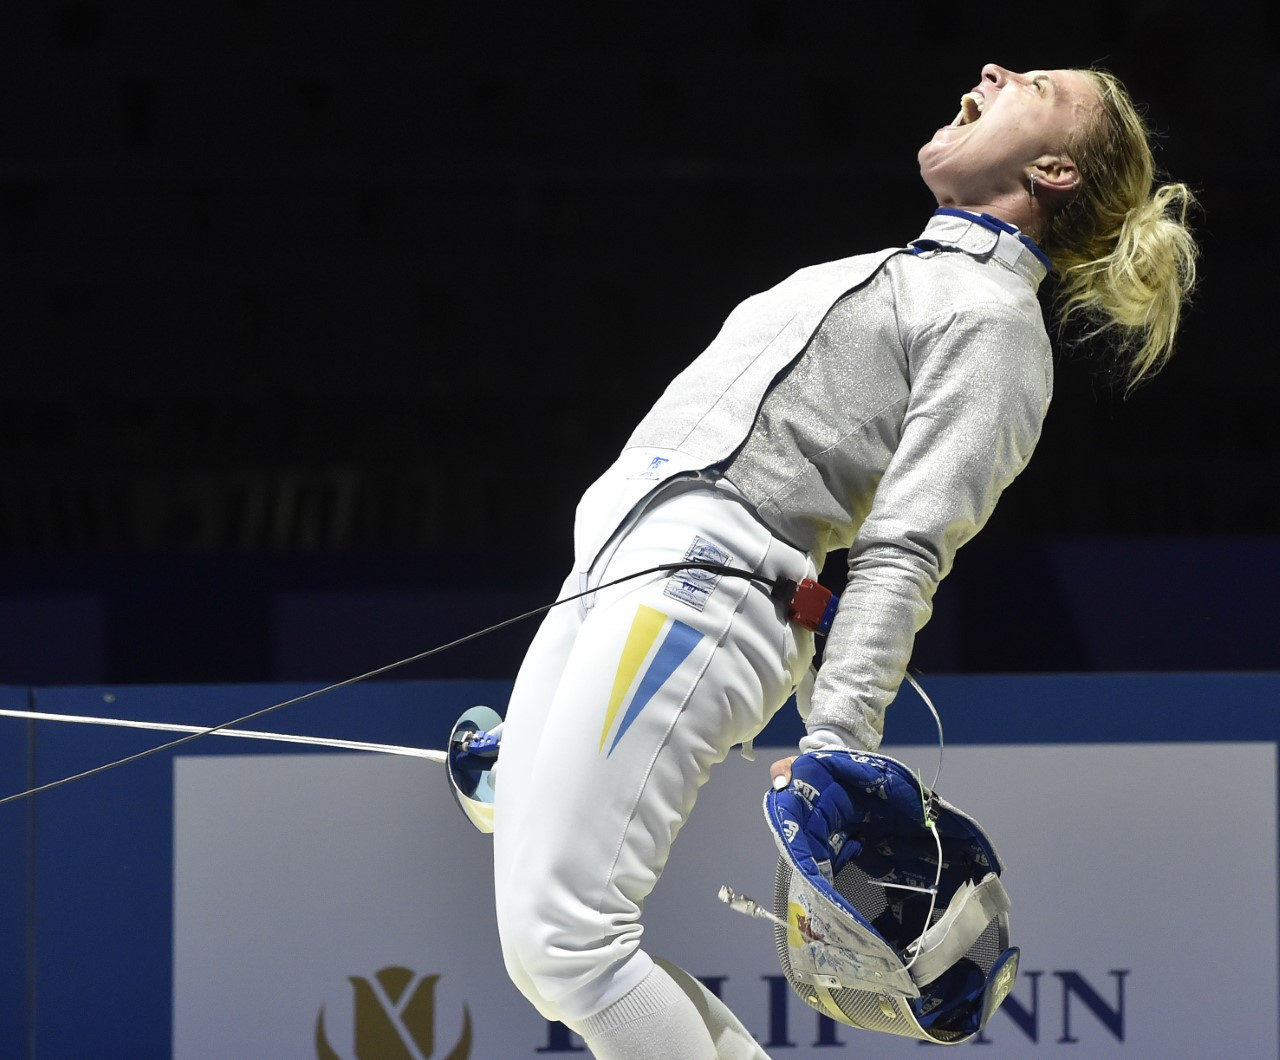 Olga Kharlan claimed her sixth European title on a dramatic first day in Düsseldorf ©FIE